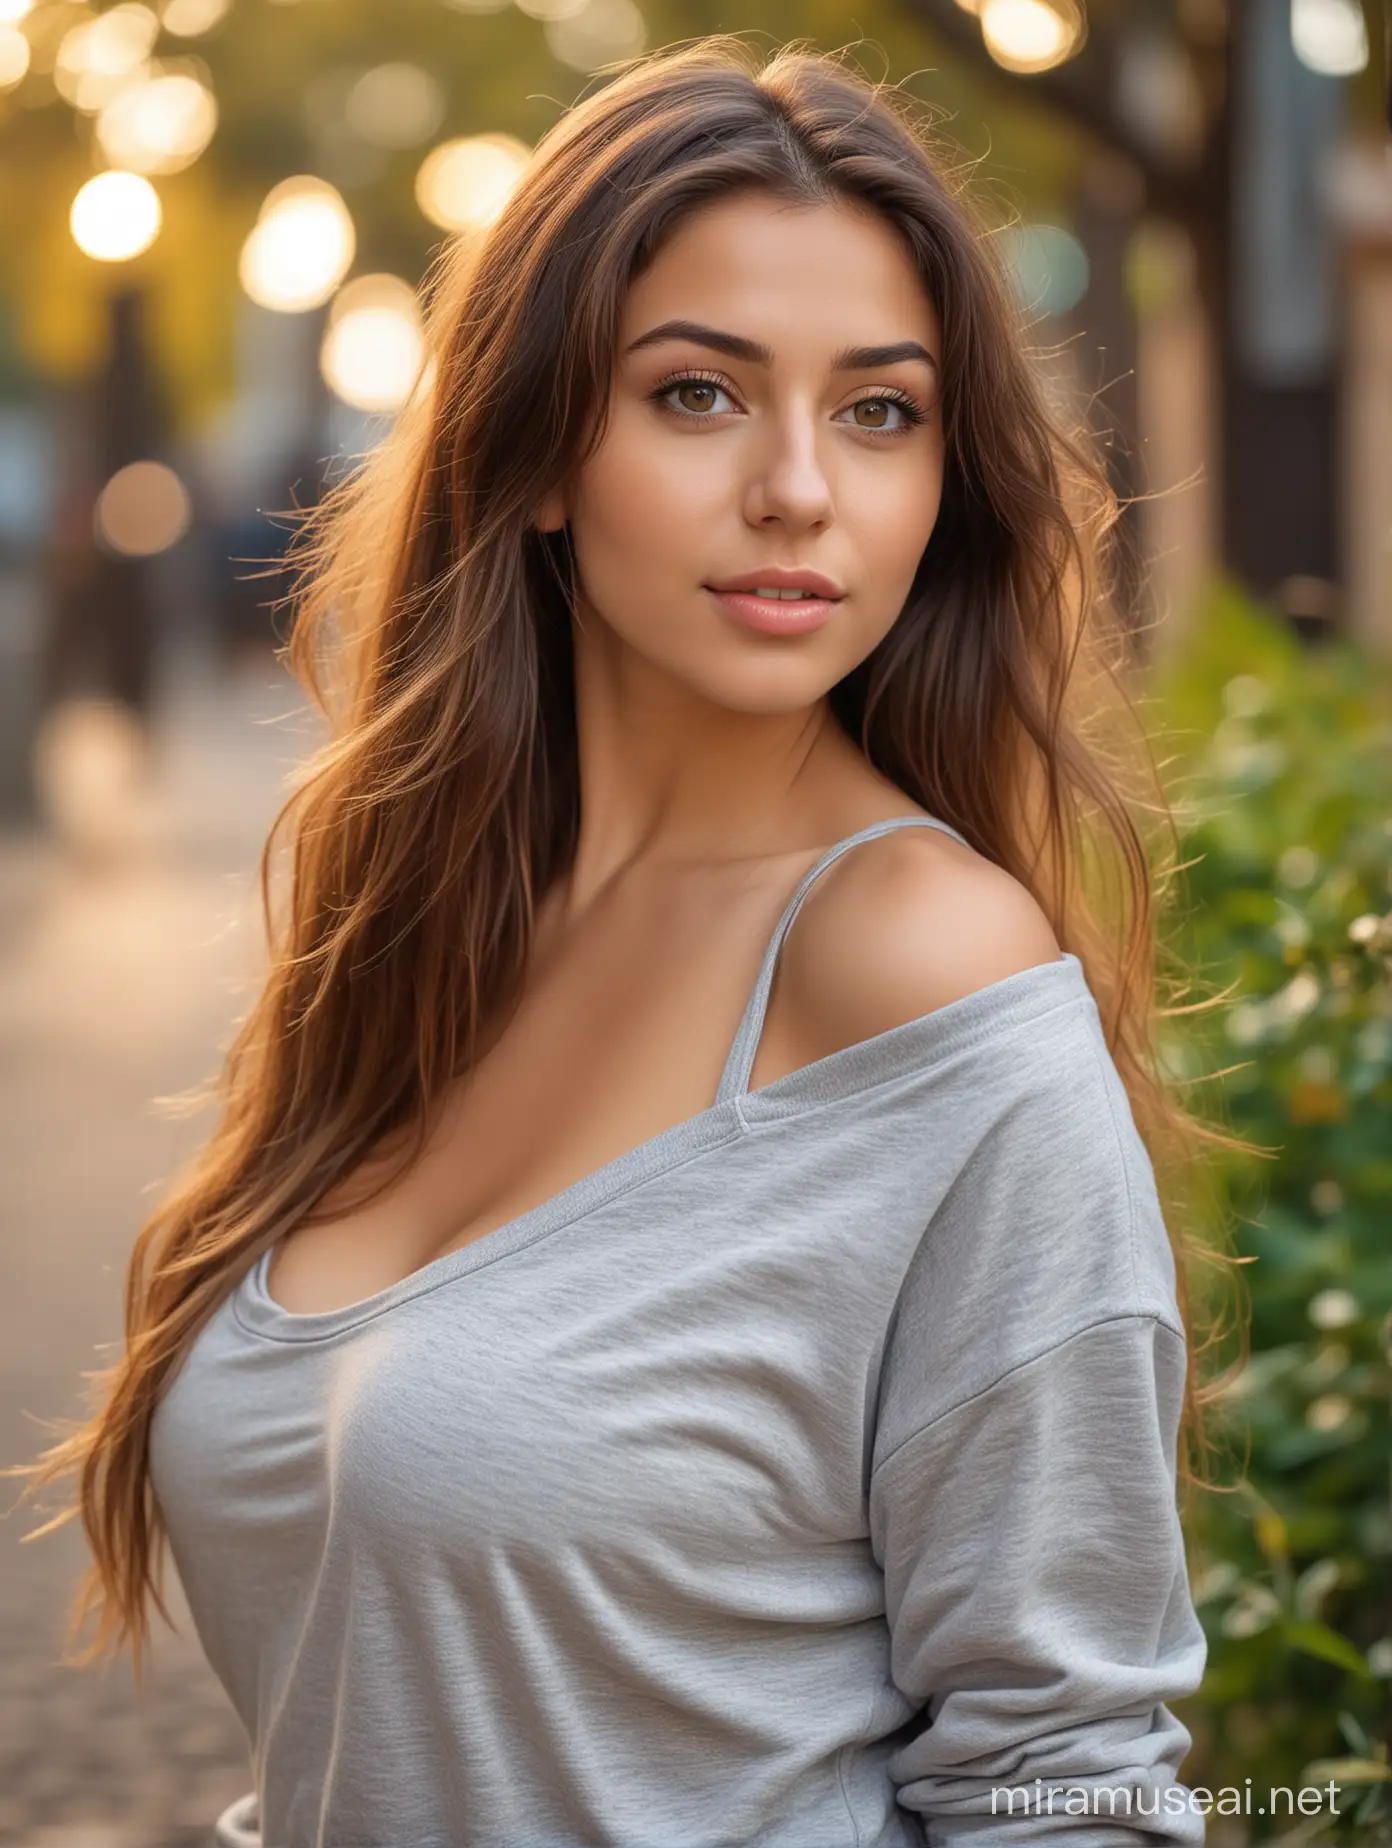 Seductive Outdoor Portrait of a LongHaired Beauty in Casual Wear